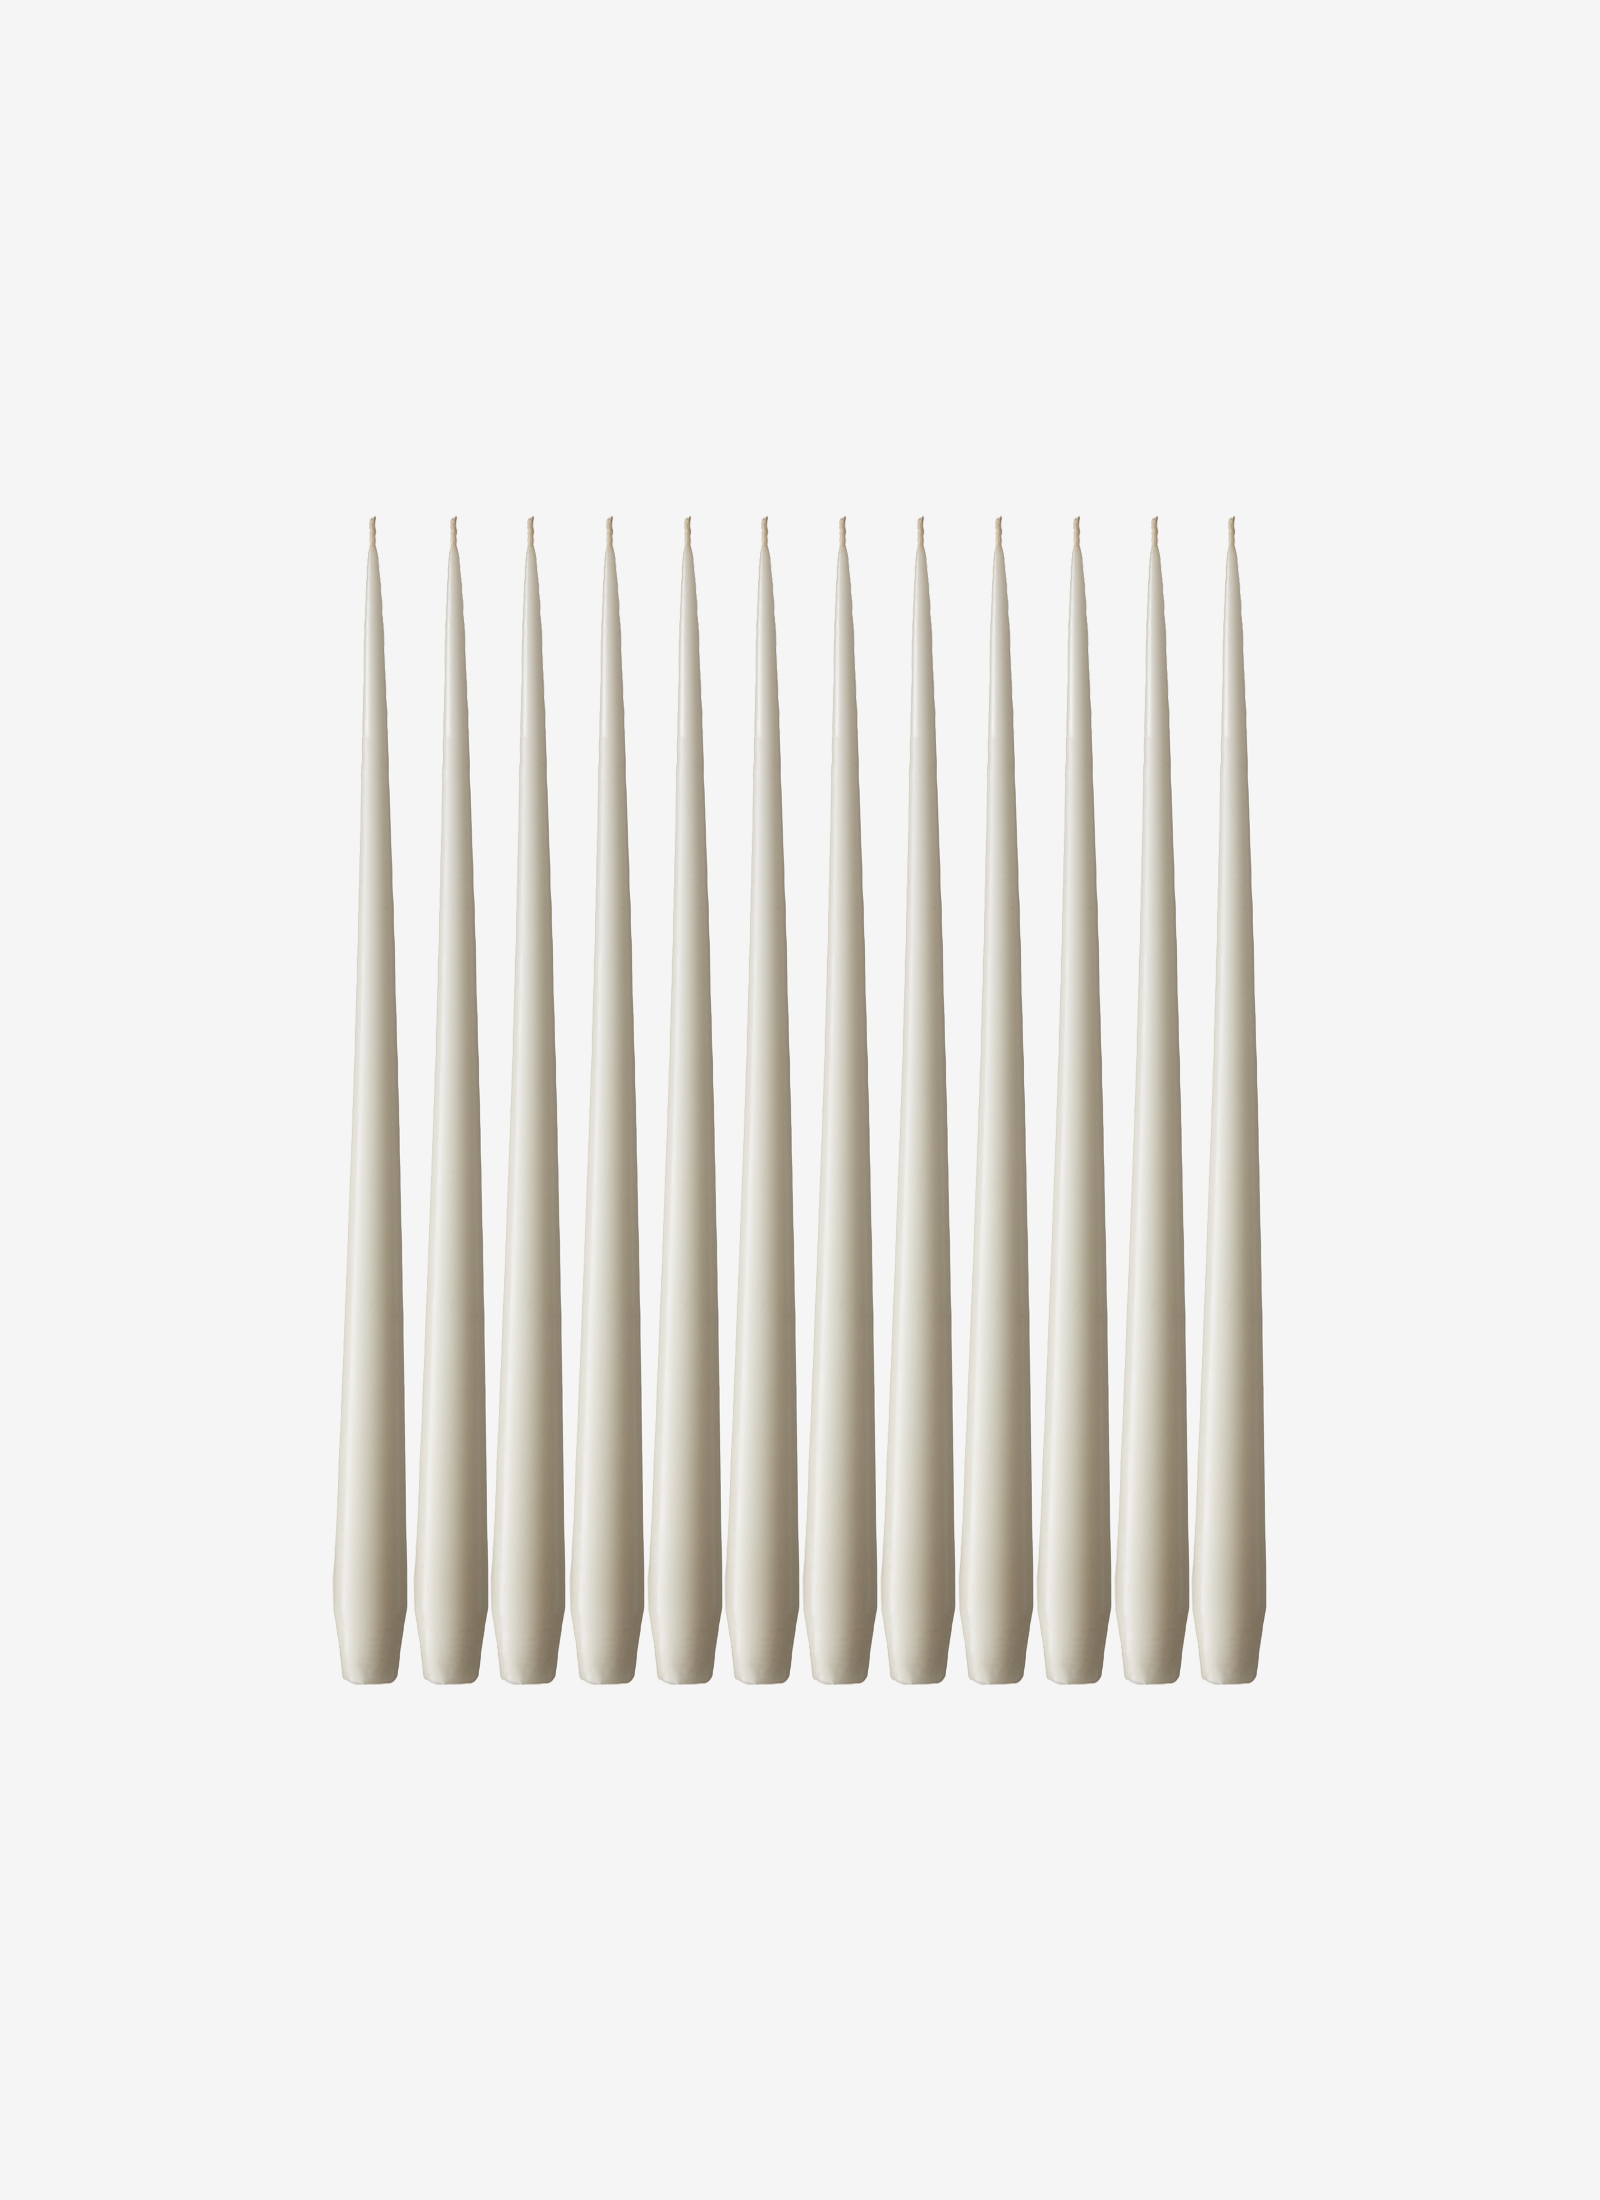 Case of 12 Tapered Candles in Ivory #06 - 42cm